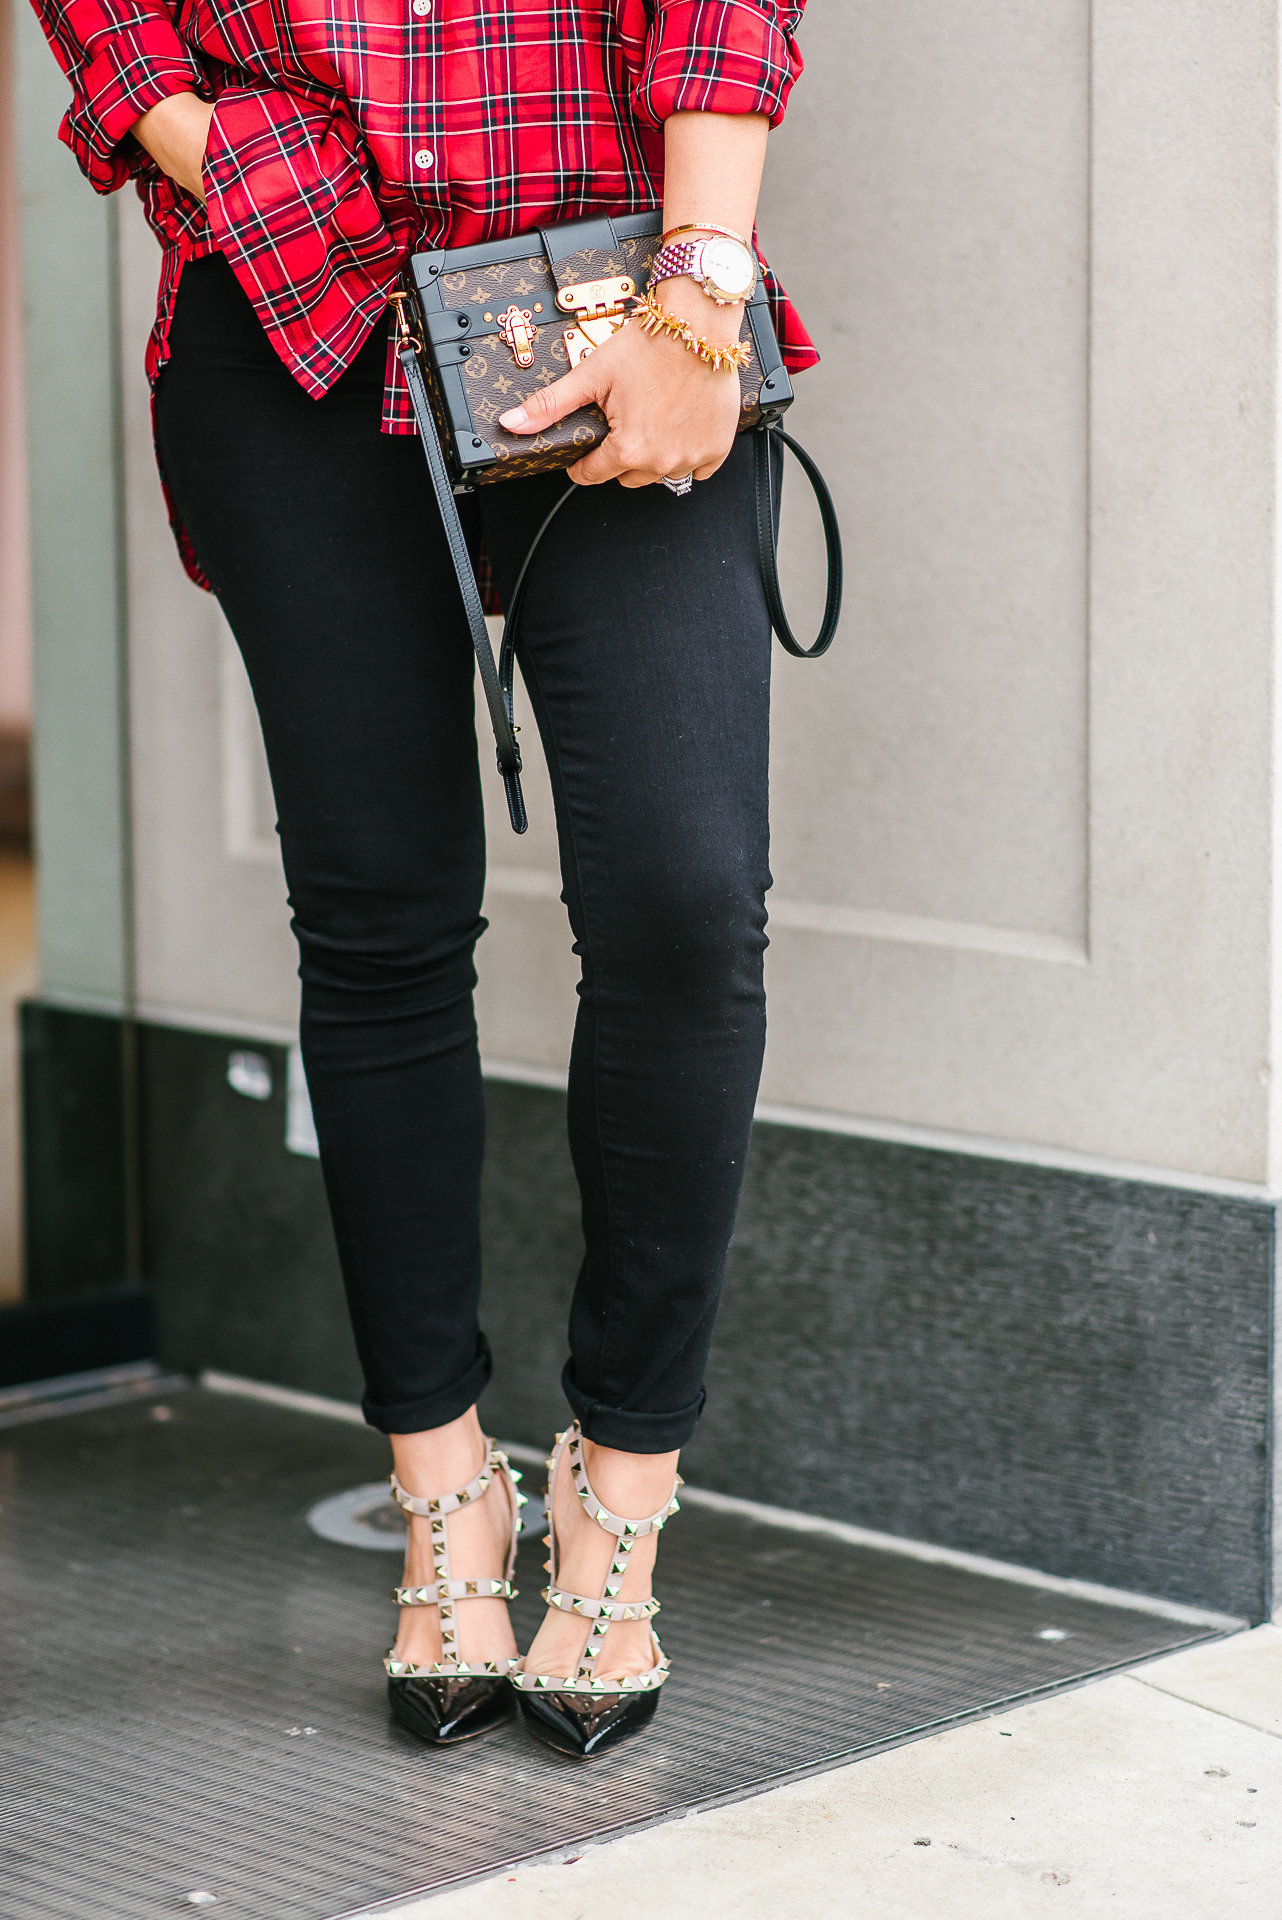 Red Plaid + Rockstuds | LuxMommy | Houston Fashion, Beauty and ...